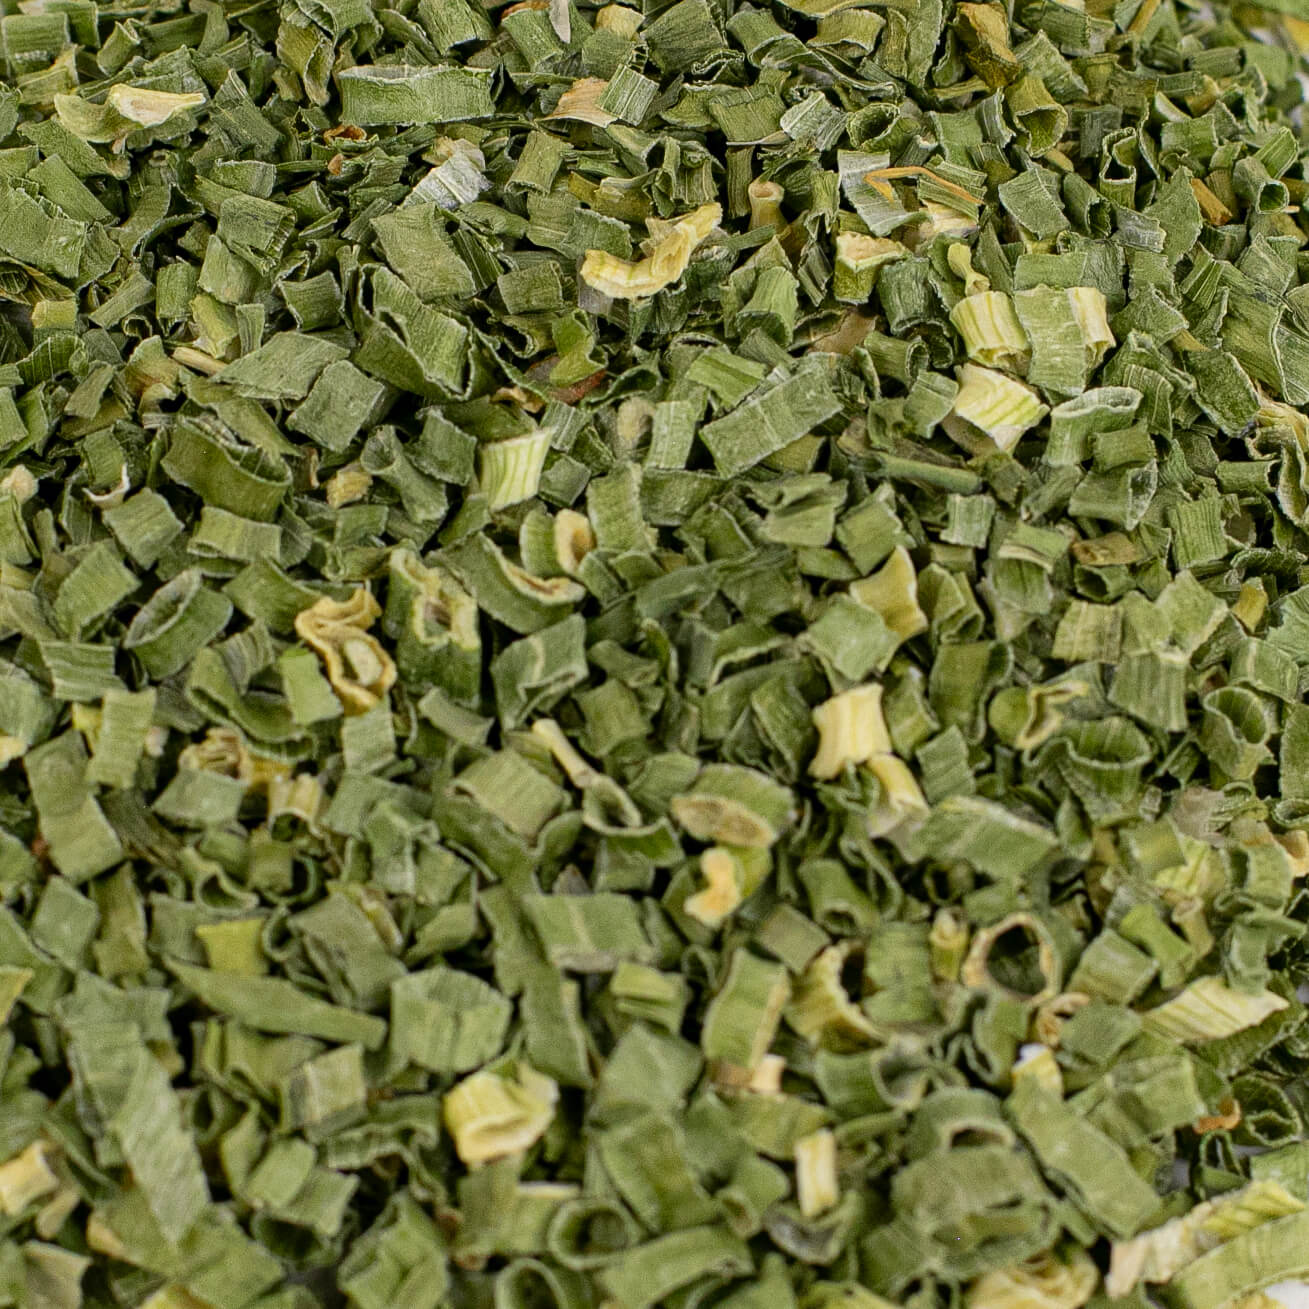 Dried Chopped Chive